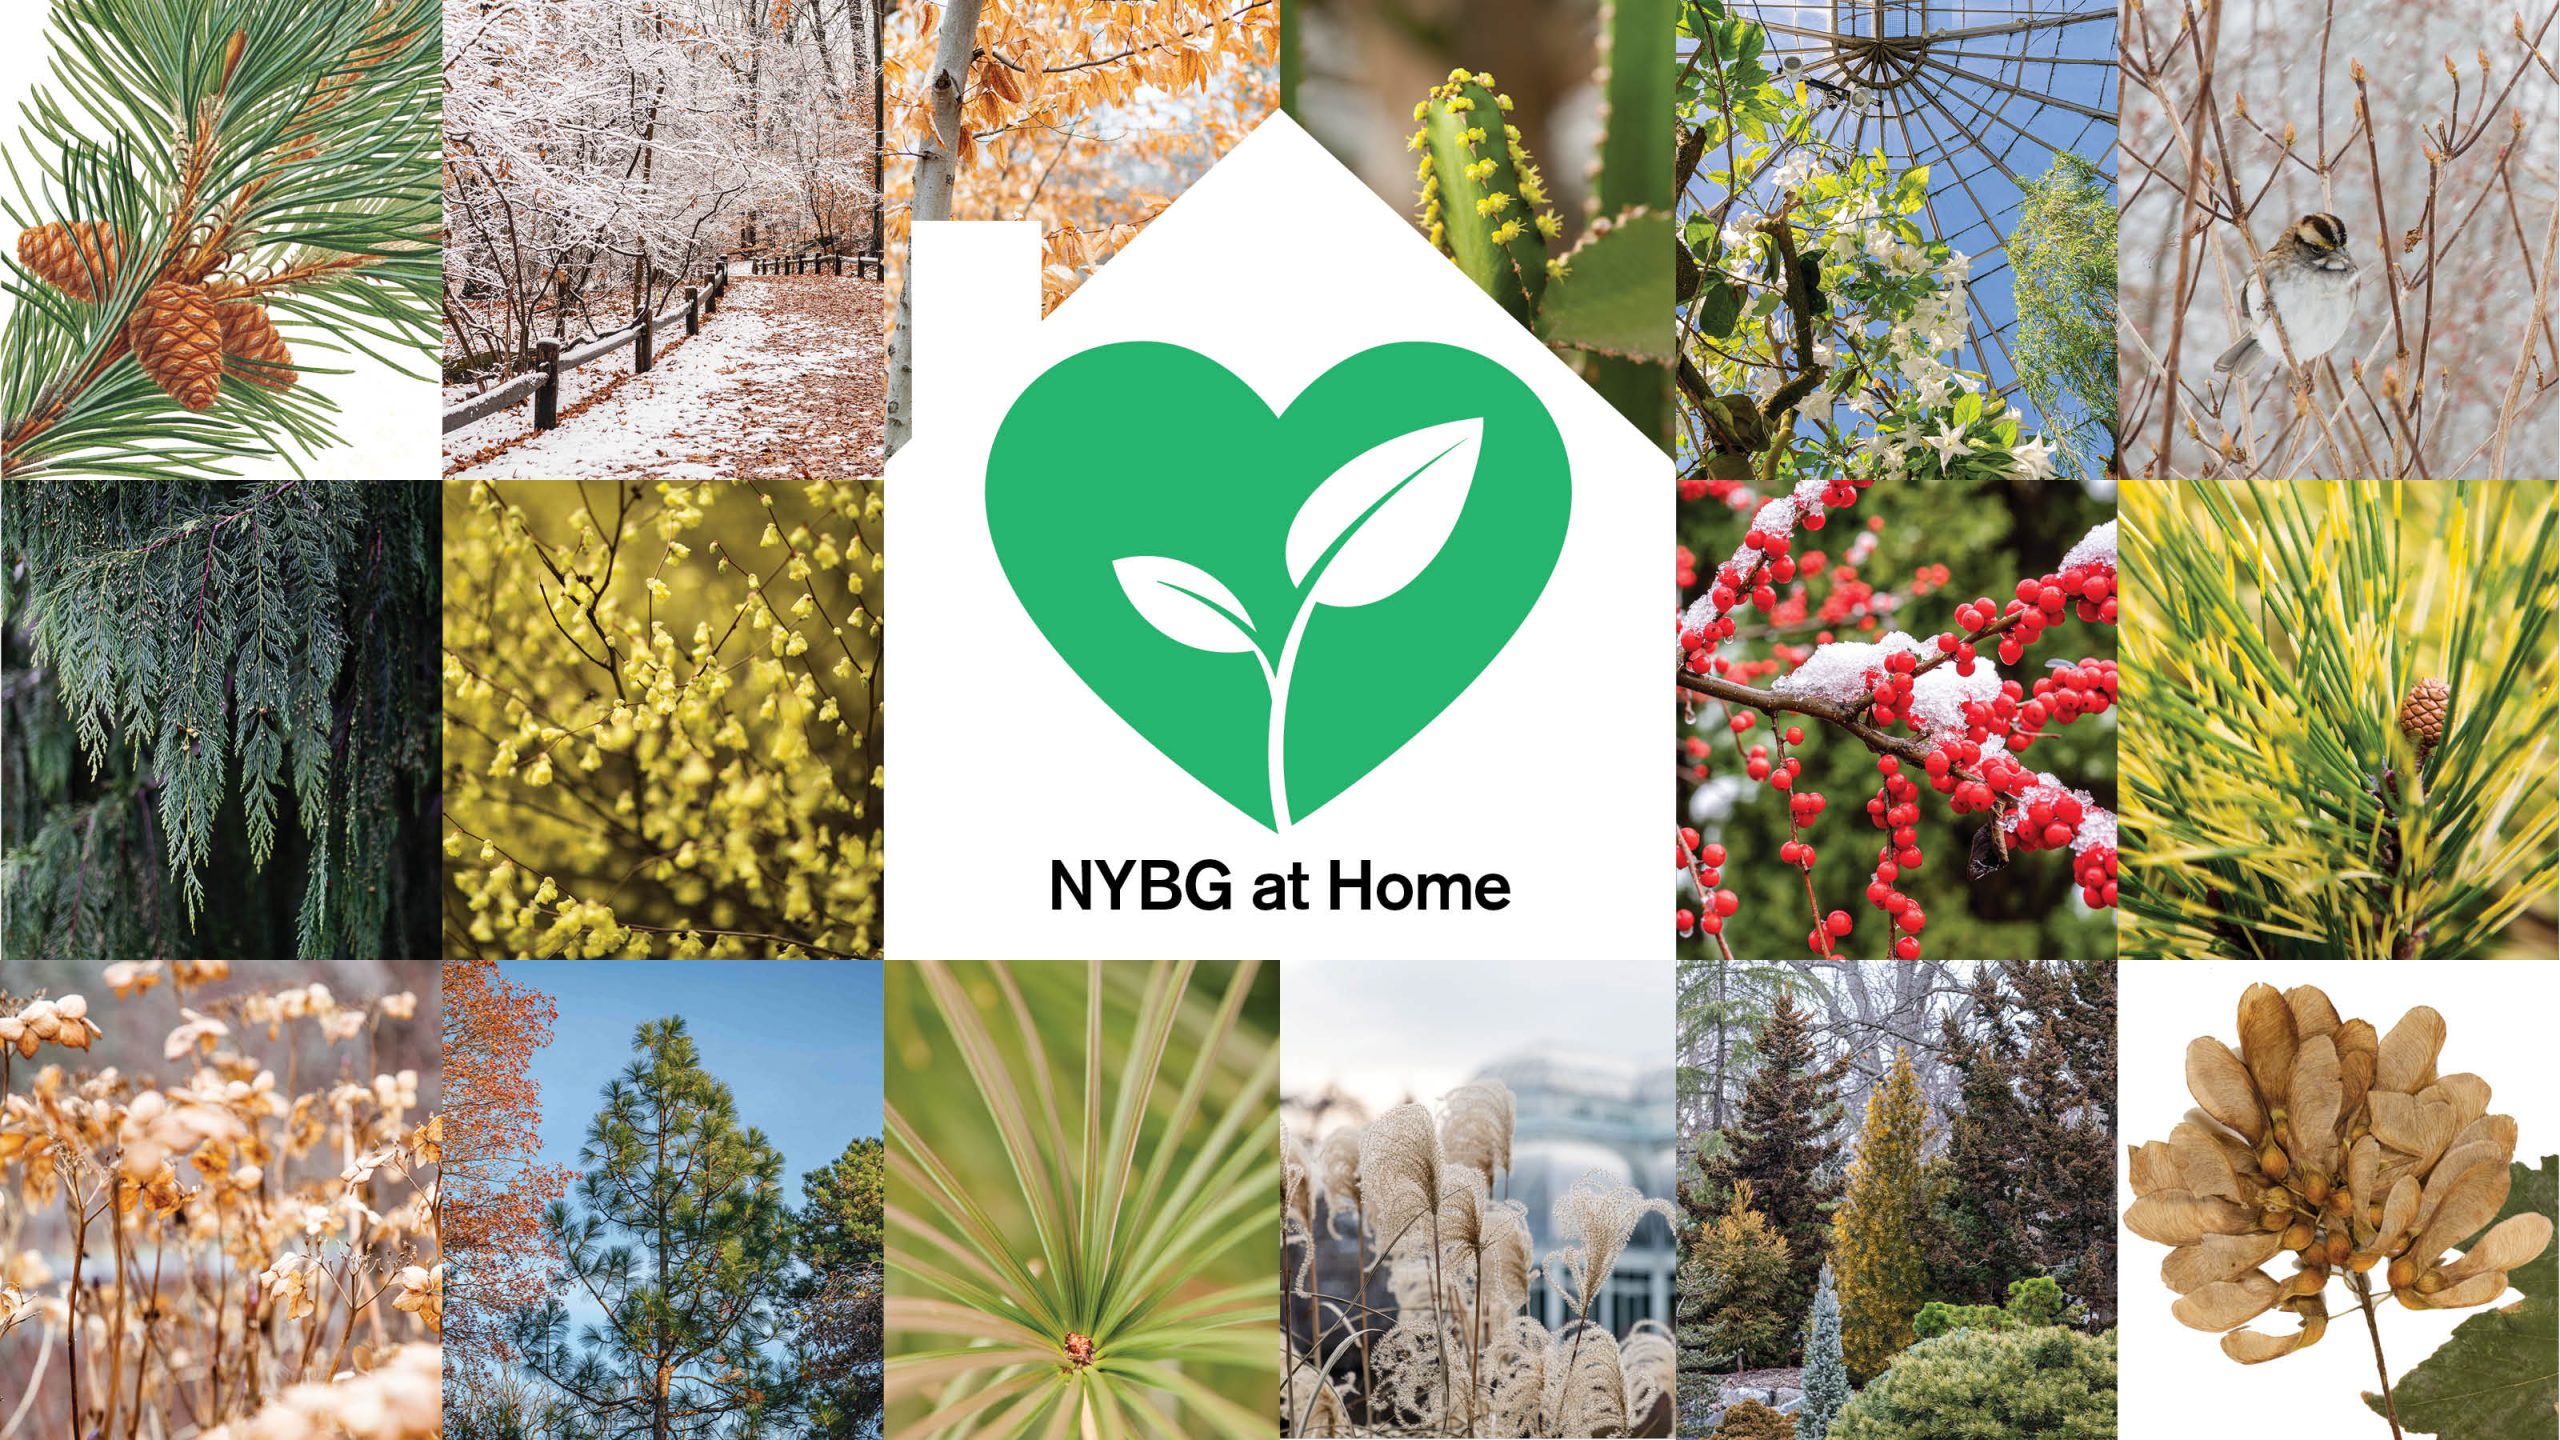 A variety of tiled images of winter plants with a white illustration of a home in the center, housing a green heart with a sprout growing inside, along with the words "NYBG at Home."